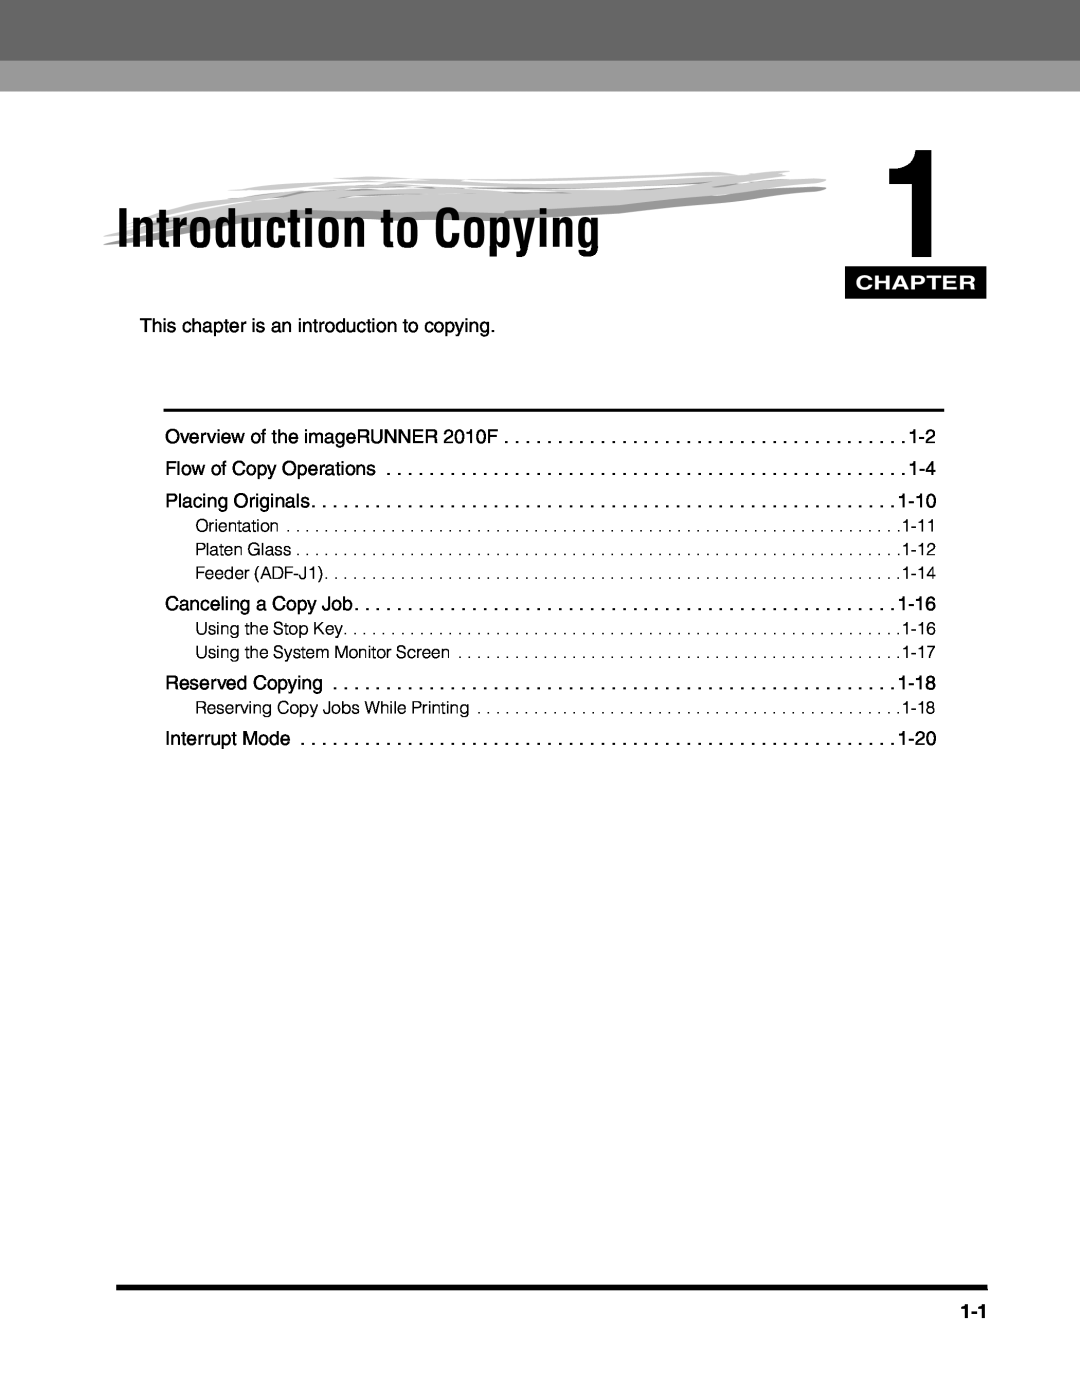 Canon 2010F manual Introduction to Copying, Chapter 